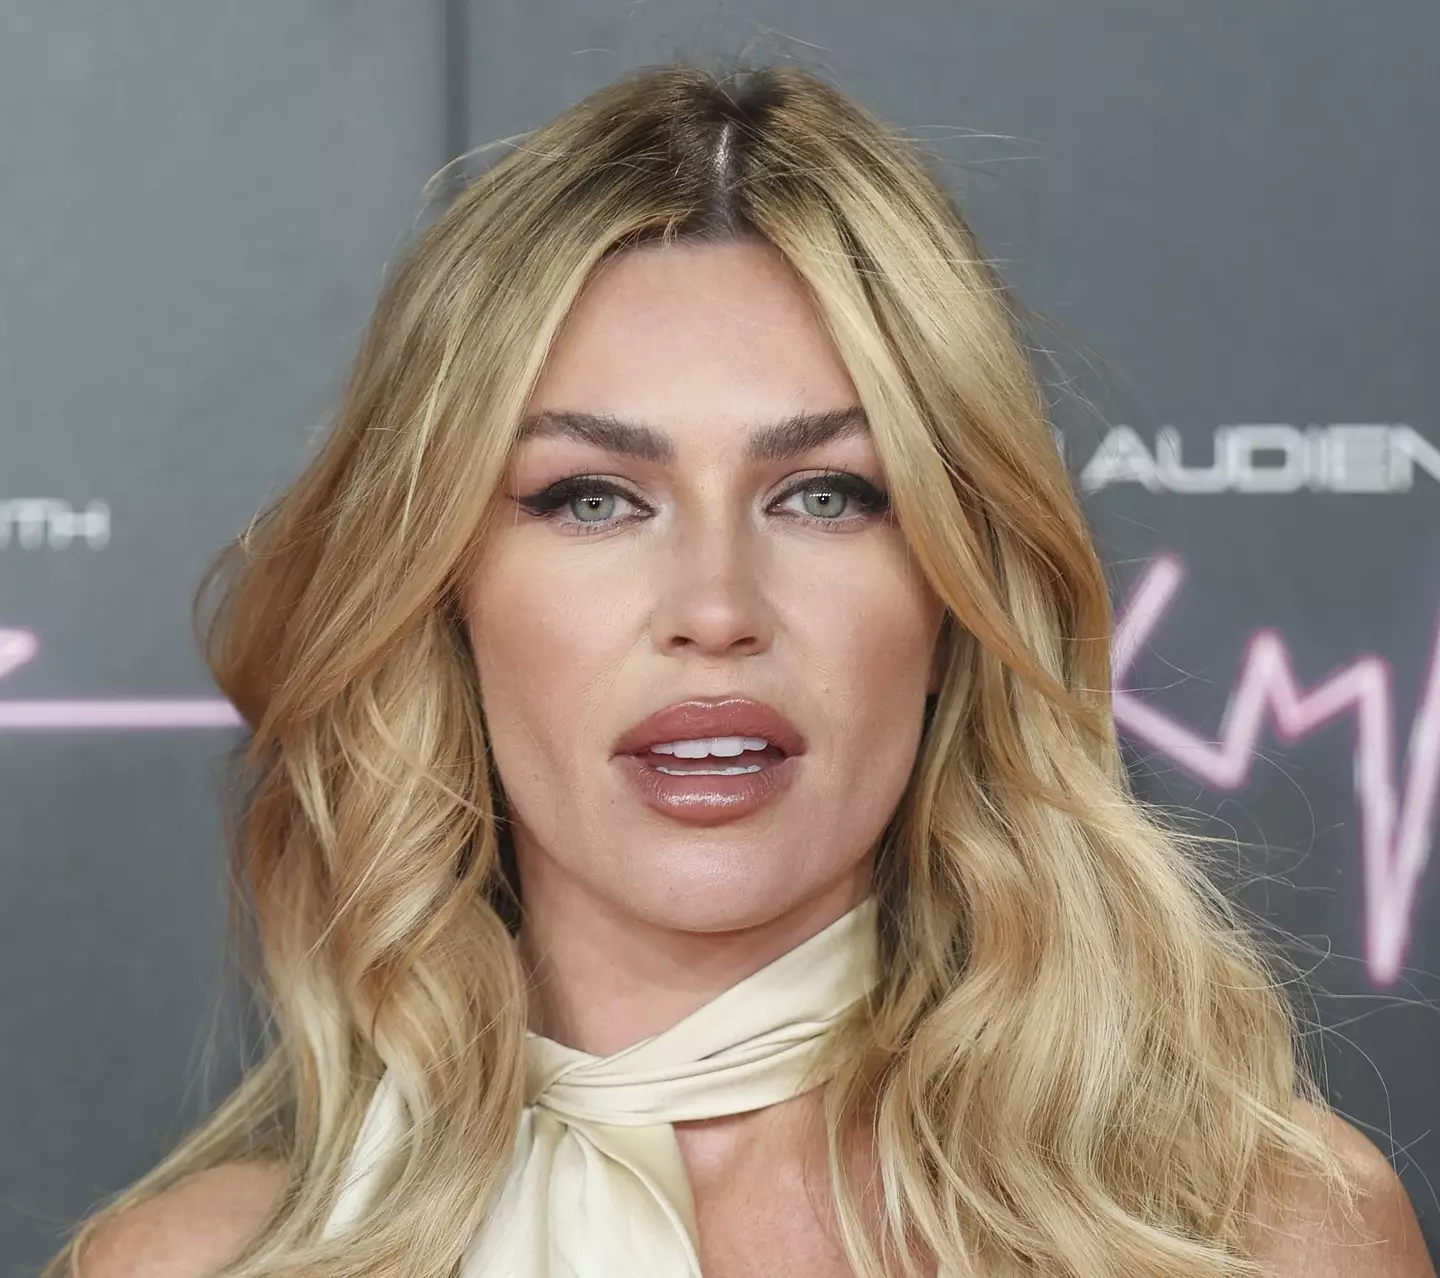 Abbey Clancy was worried about her health after getting a symptom of MS.